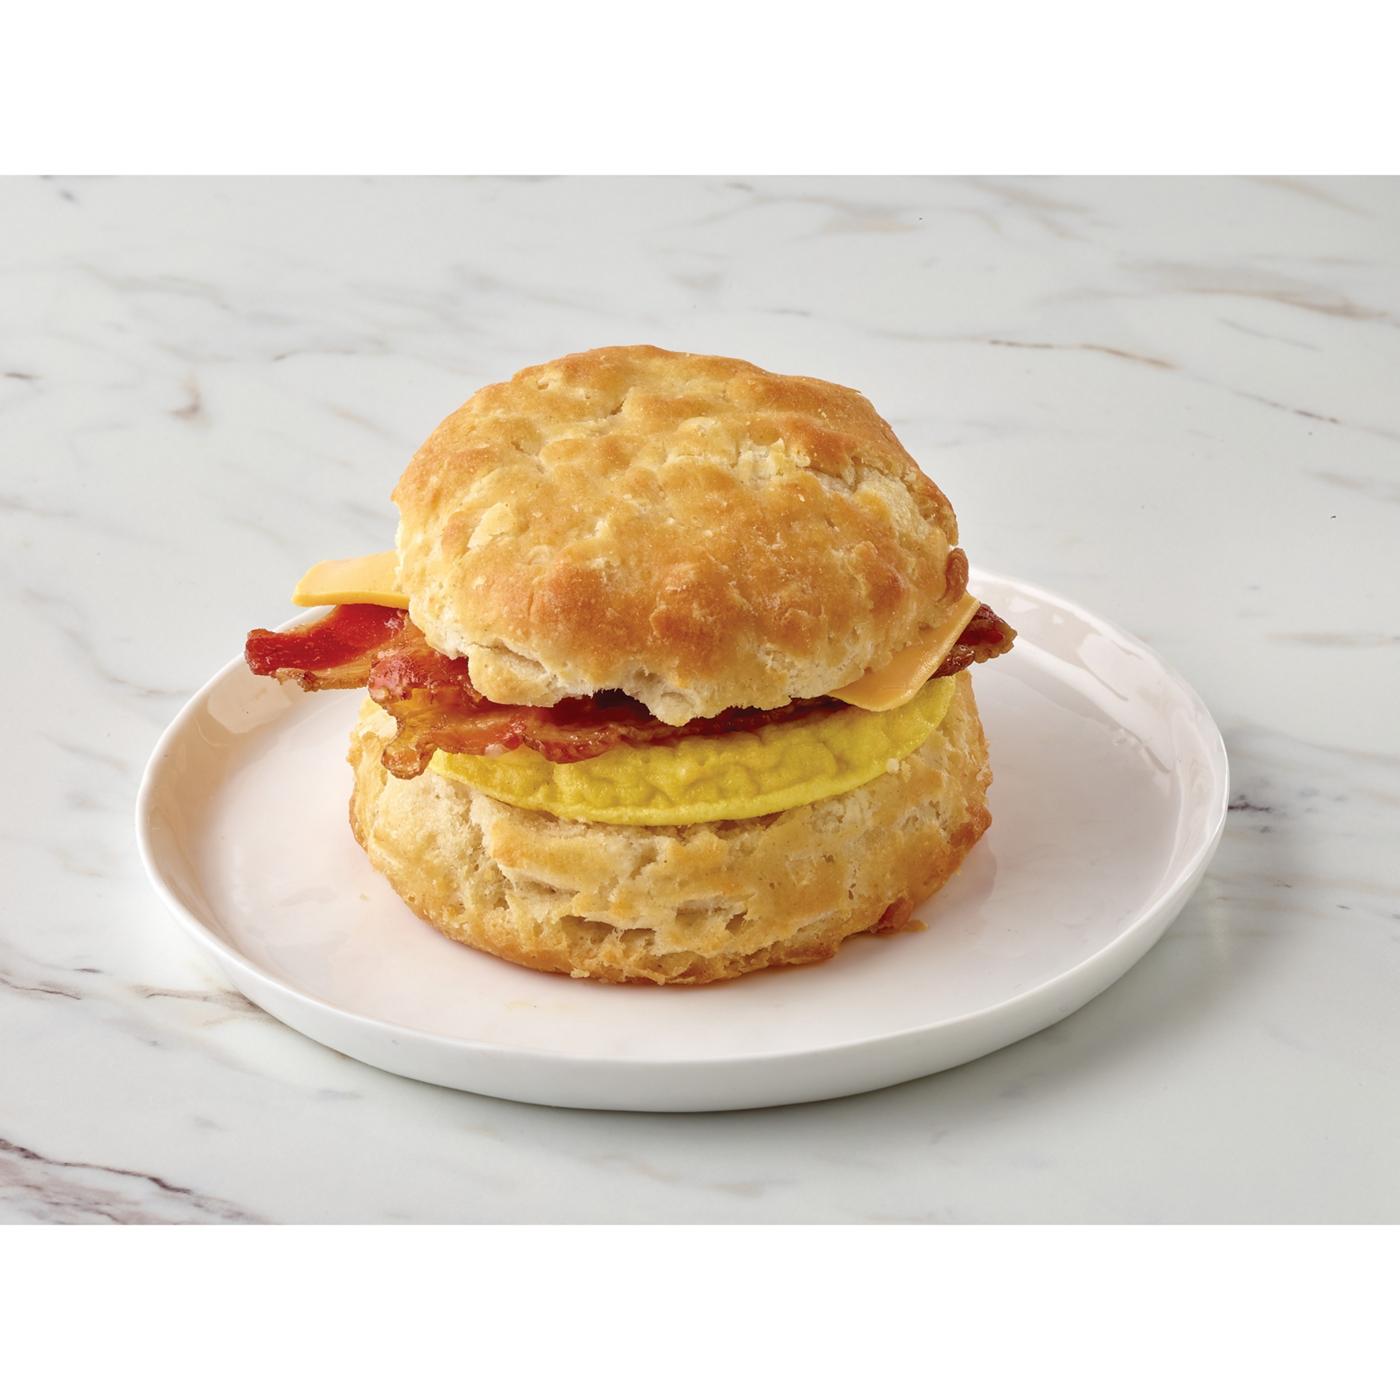 H-E-B Bakery Breakfast Biscuit Sandwich - Bacon, Egg & Cheese; image 4 of 4